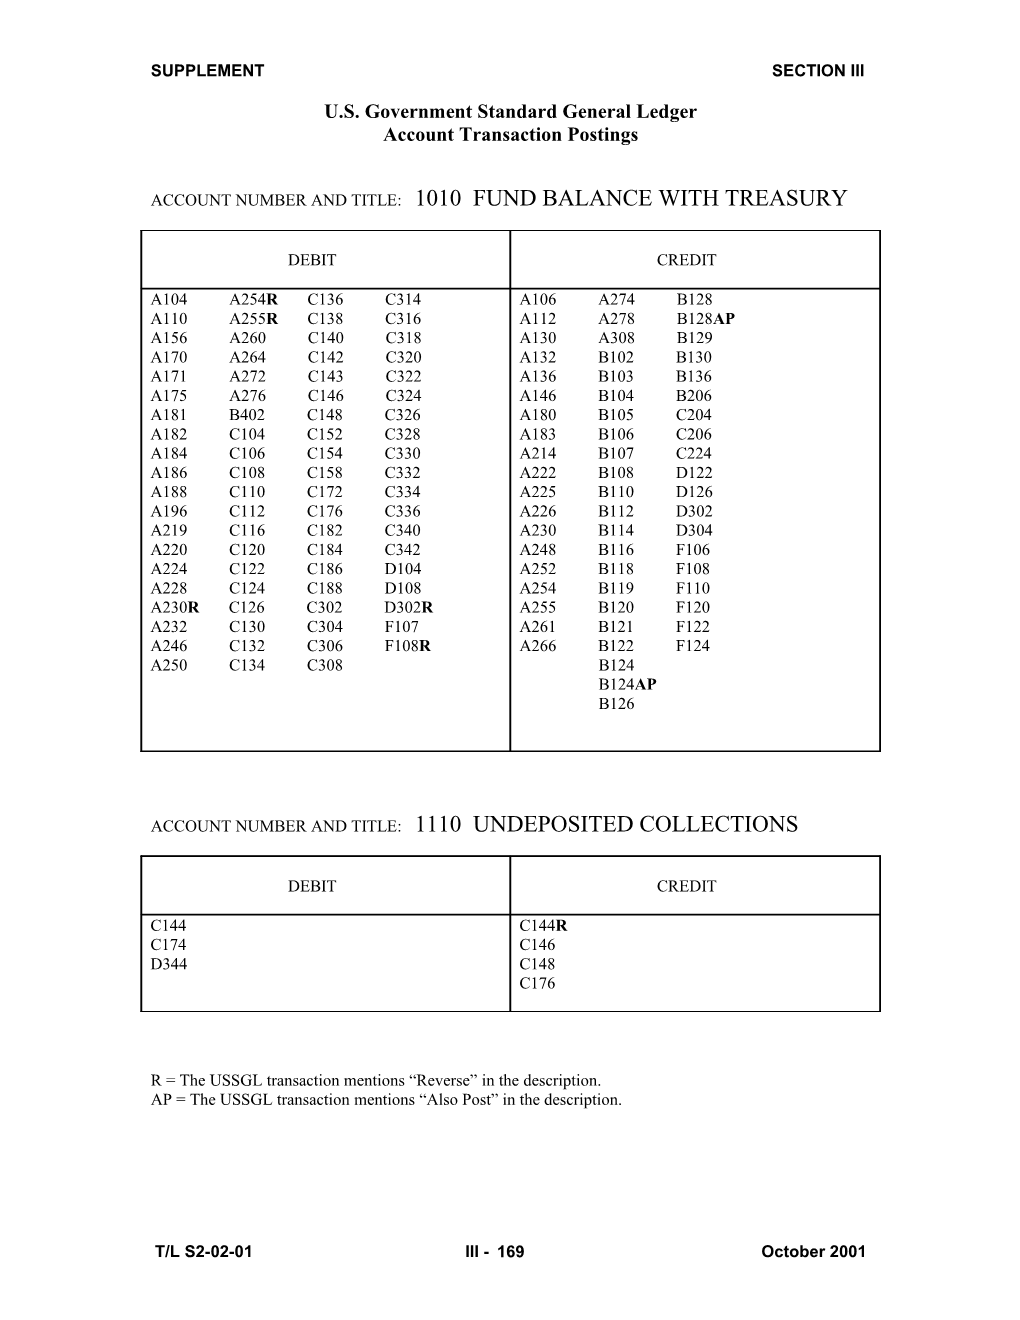 Account Number and Title: 1010 Fund Balance with Treasury